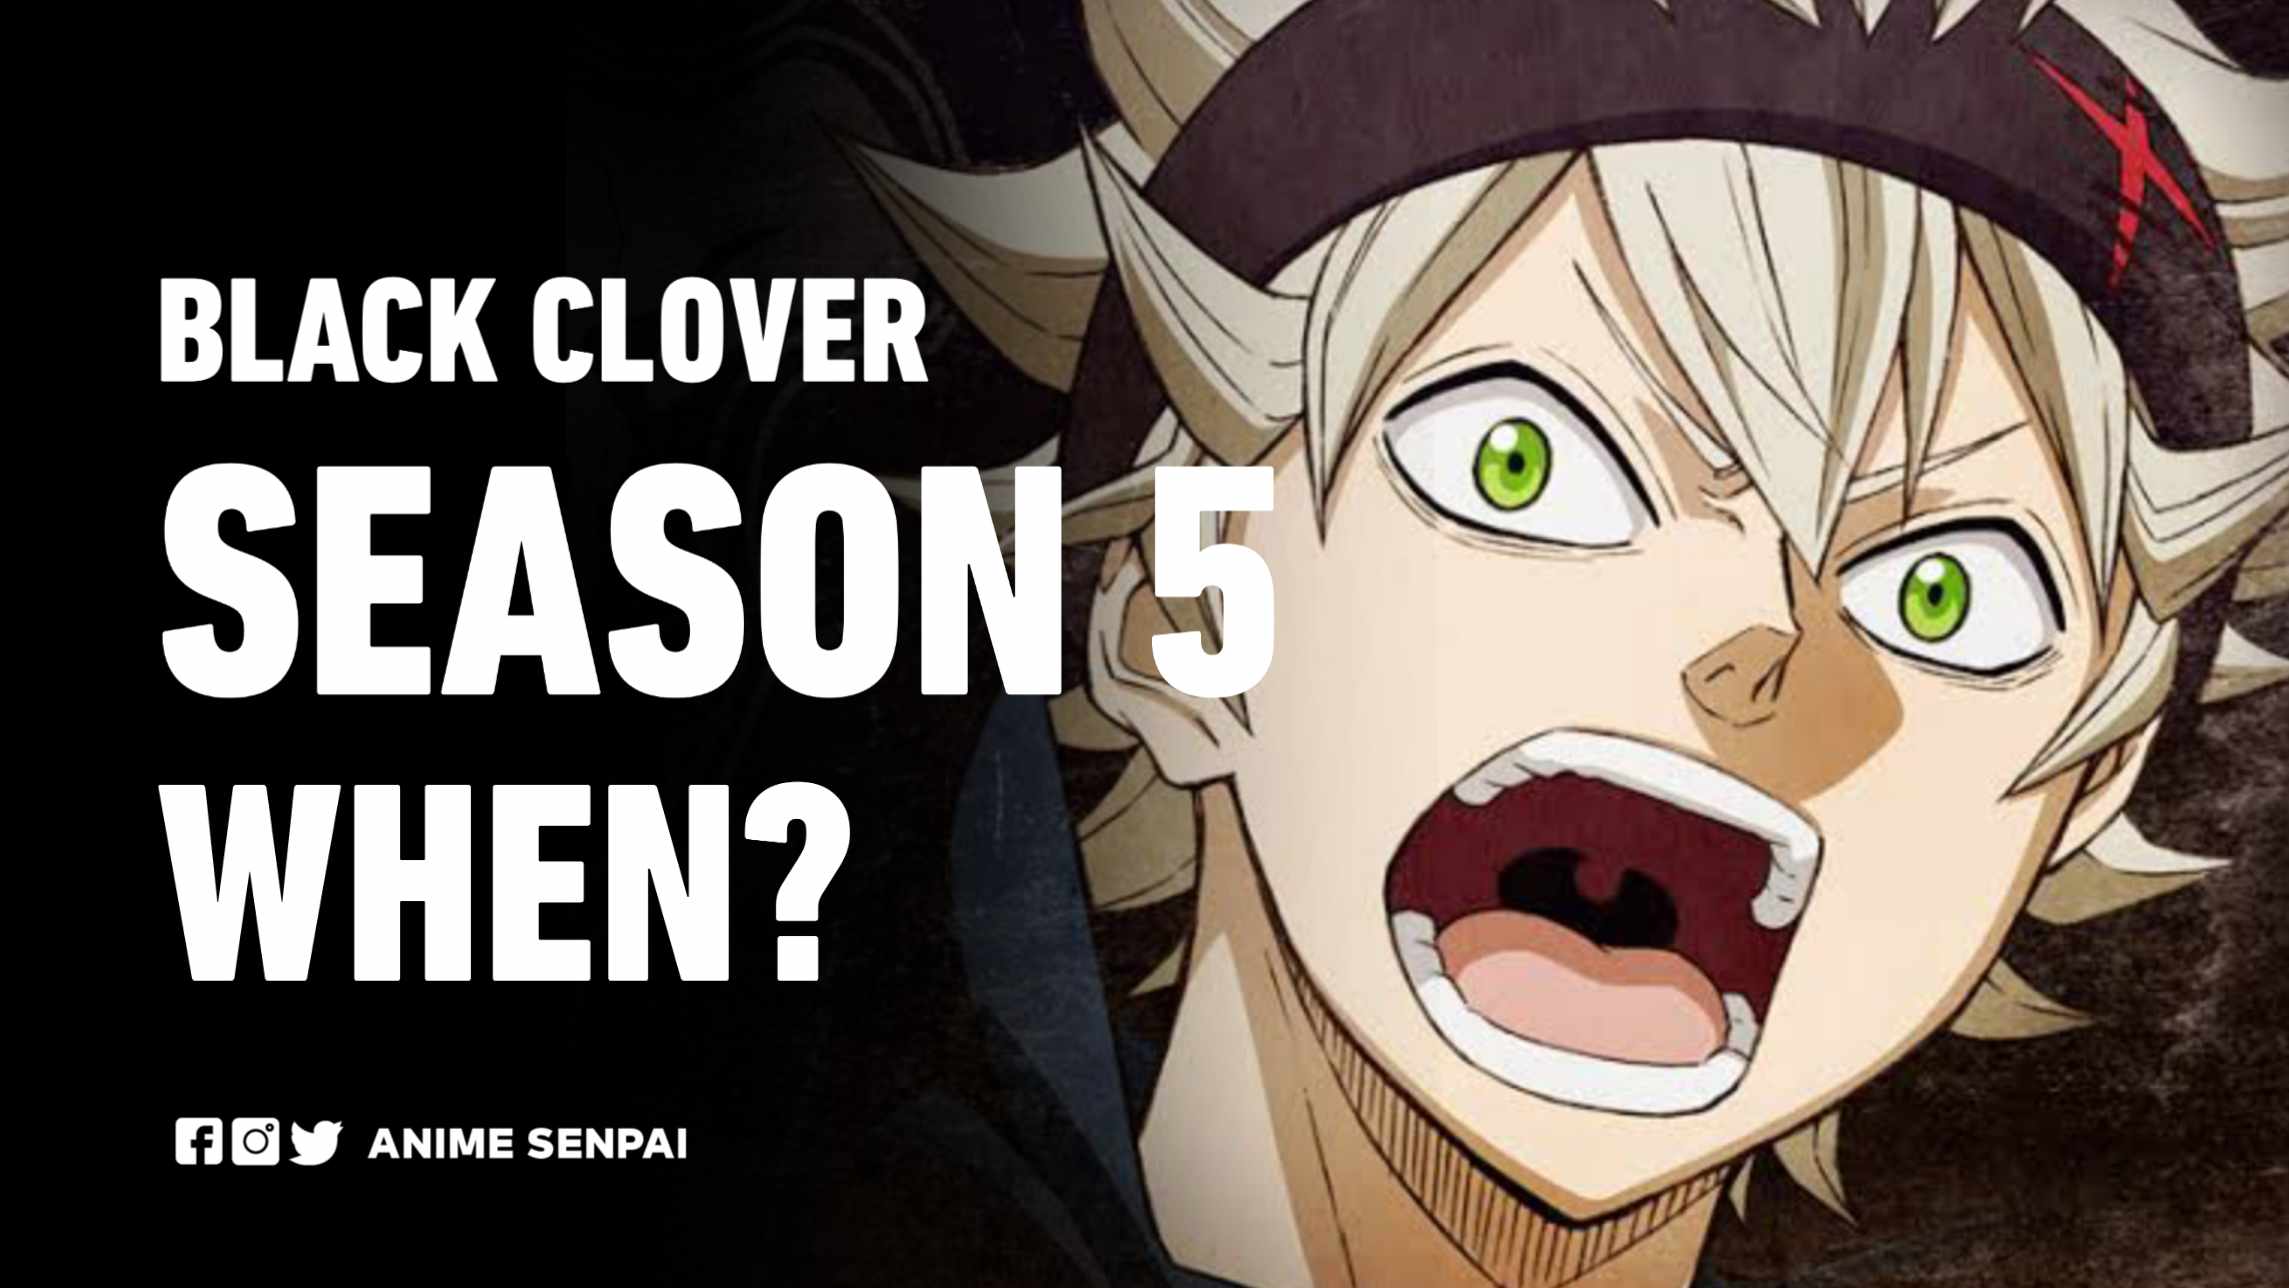 Black Clover Season 5 Release Date, Is It Coming Out In 2022? - Anime Senpai